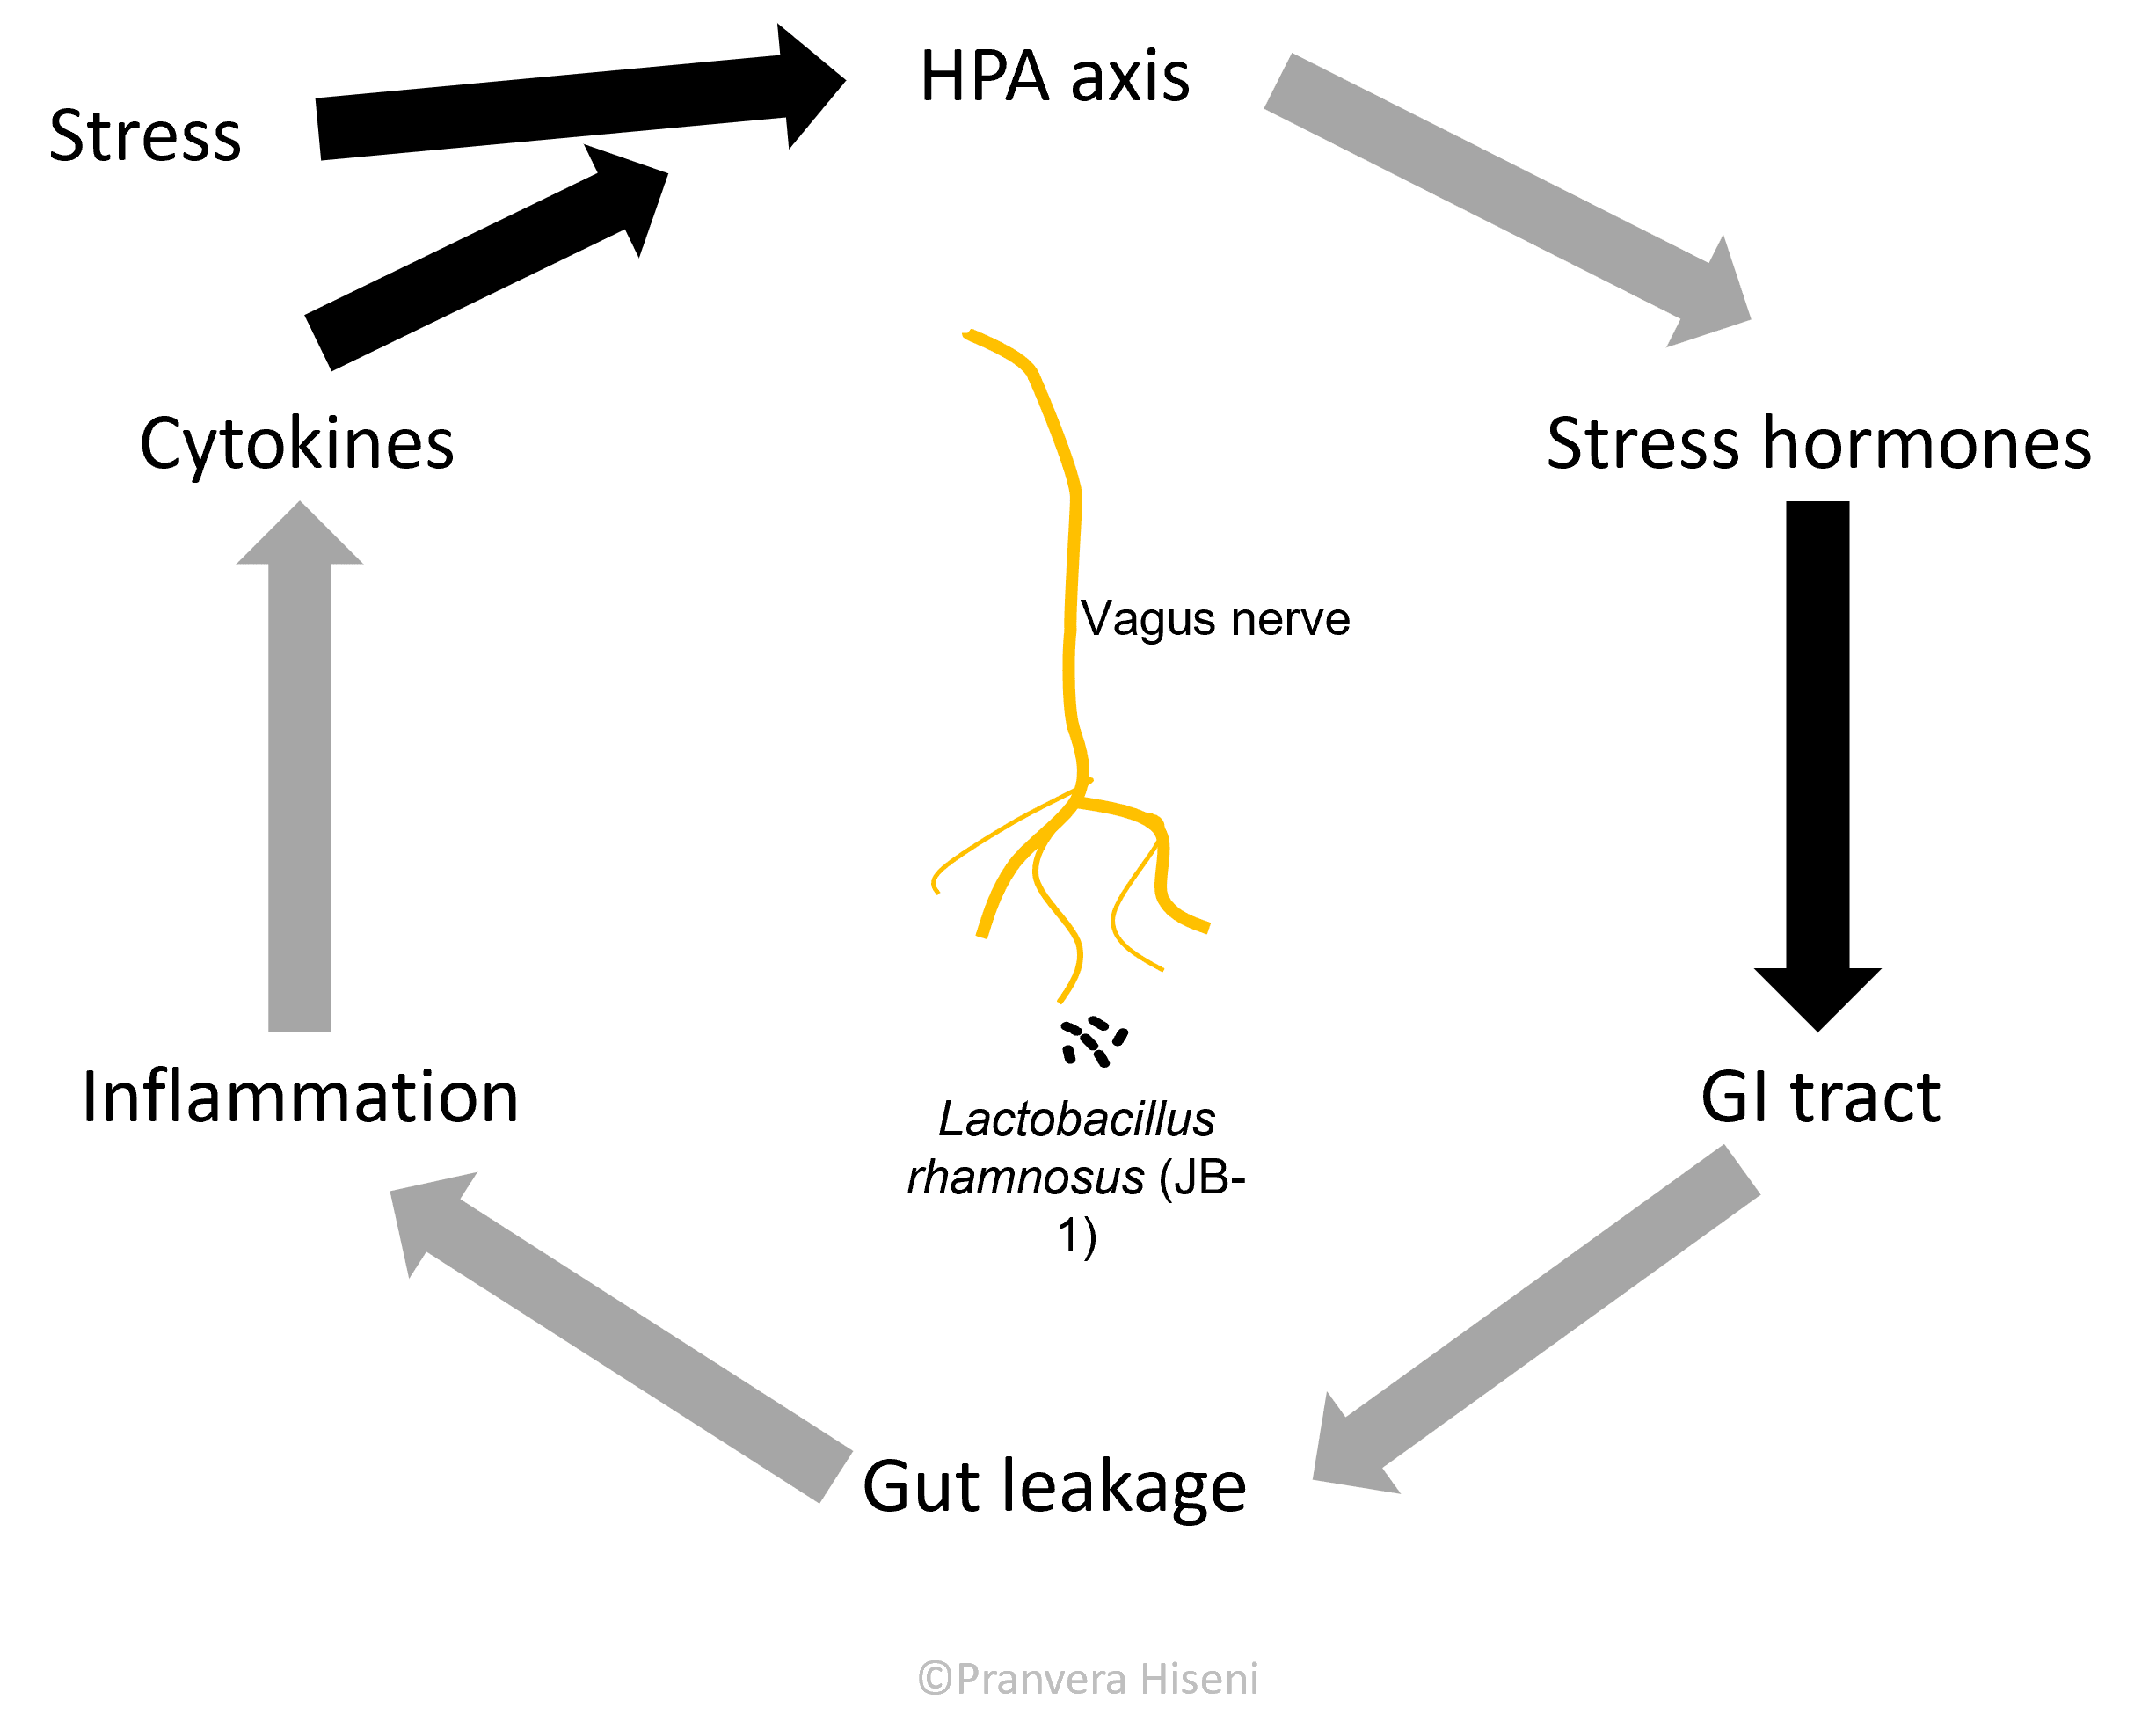 The vicious stress cycle involving the HPA axis and a leaky gut